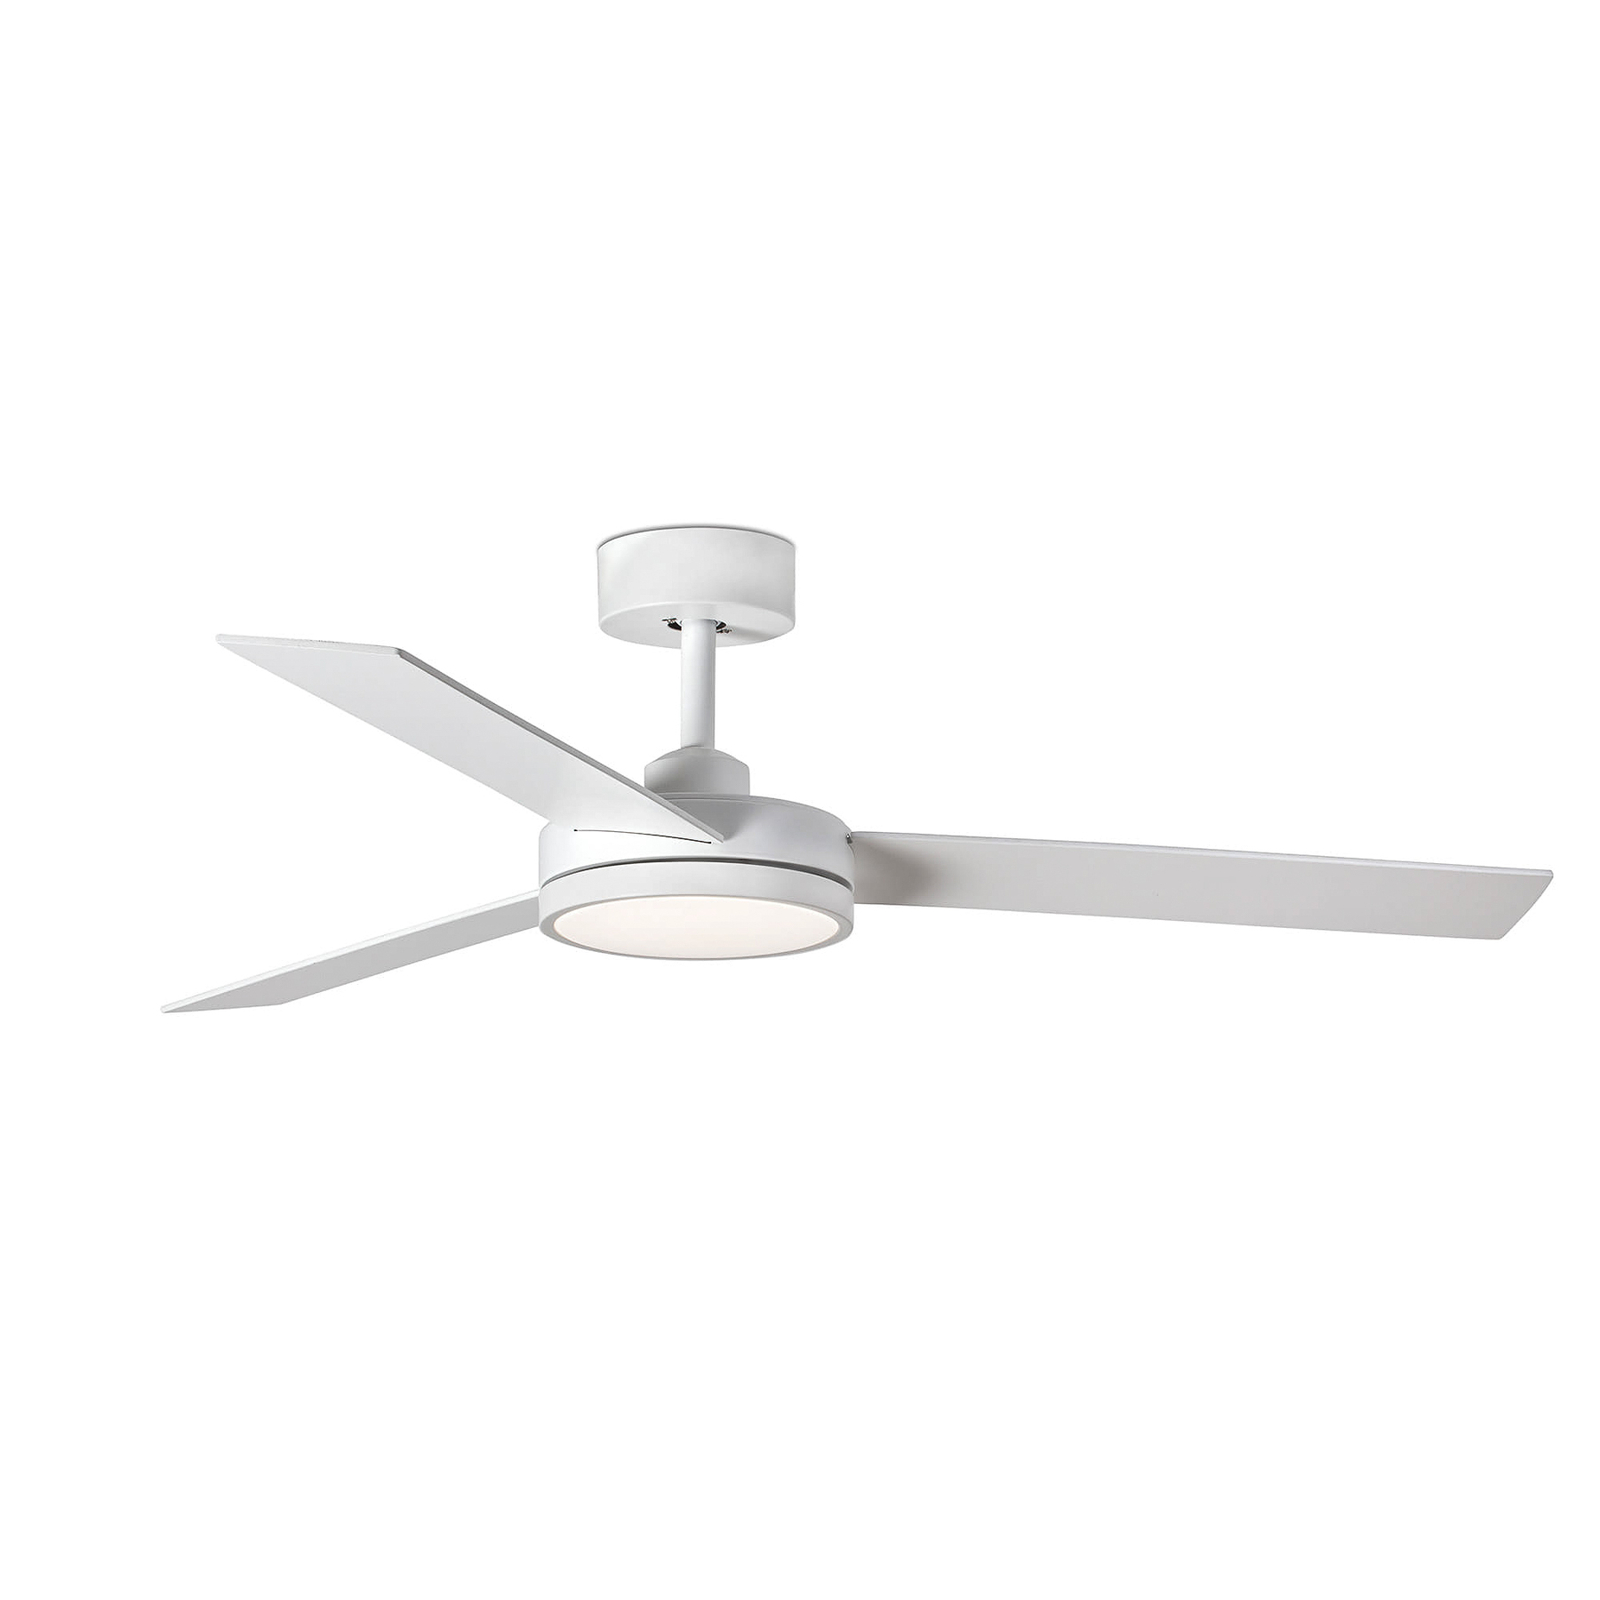 Barth LED ceiling fan with light, white